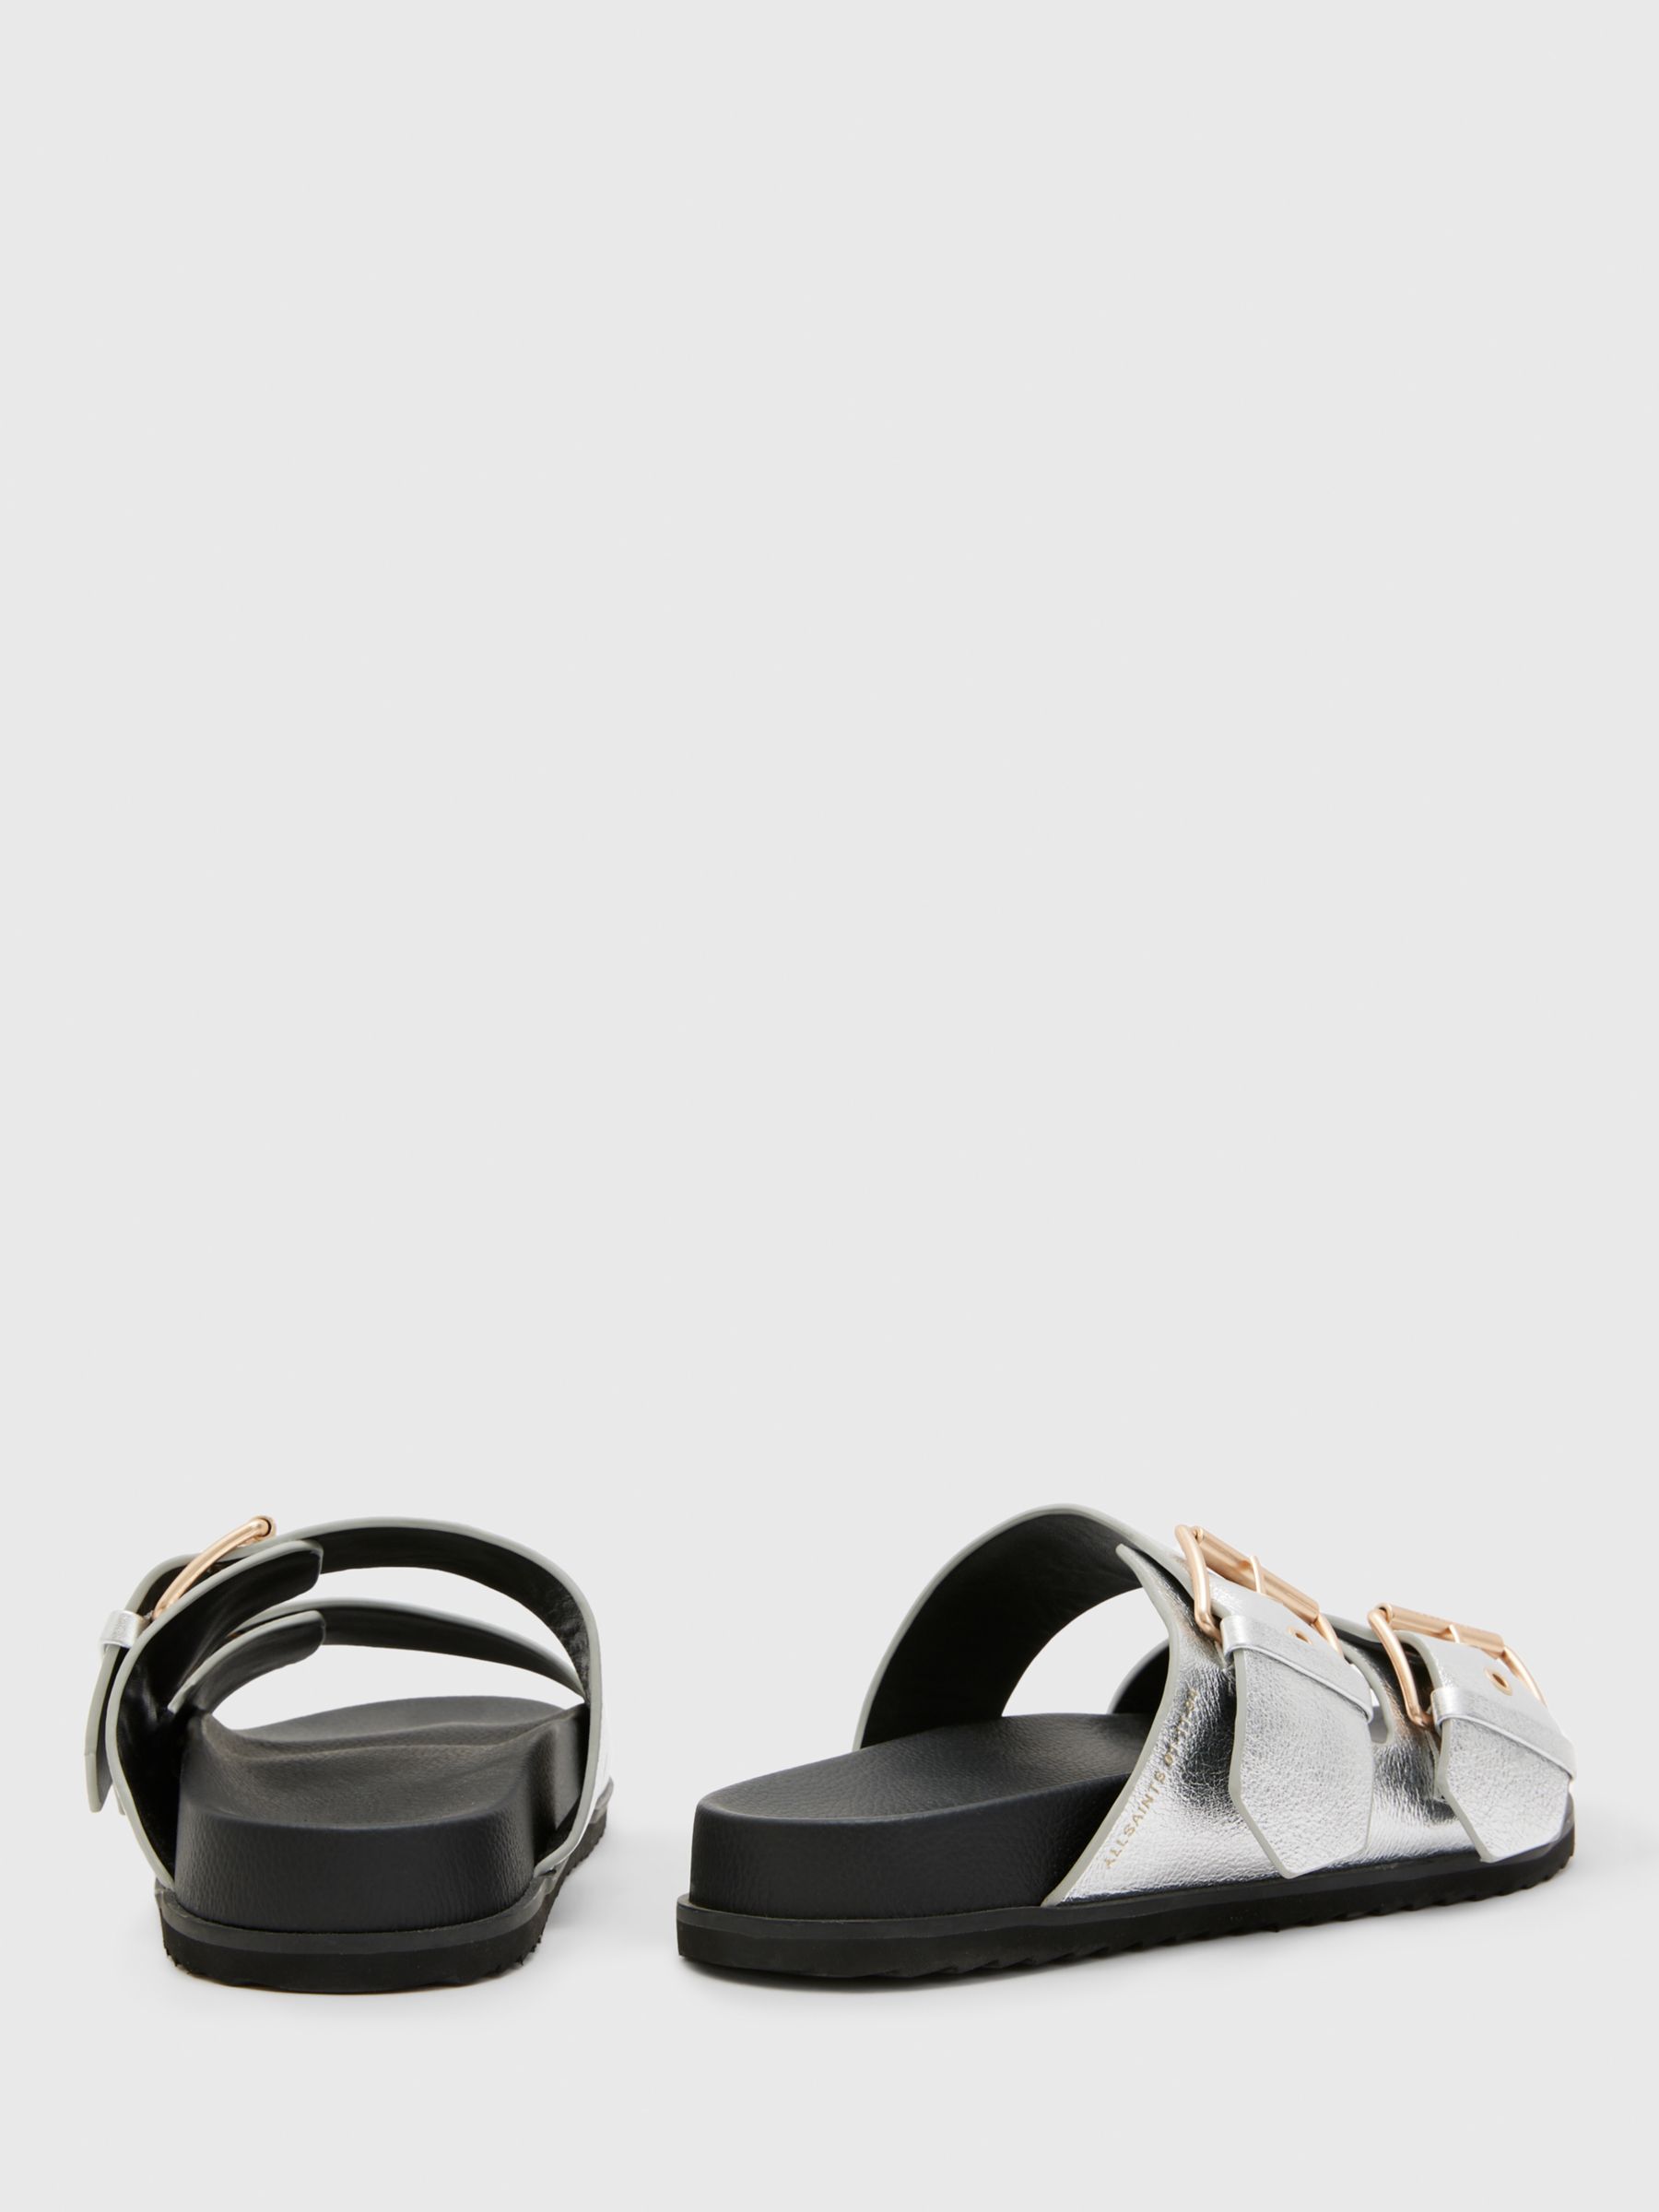 AllSaints Sian Leather Buckle Metallic Sandals, Silver at John Lewis ...